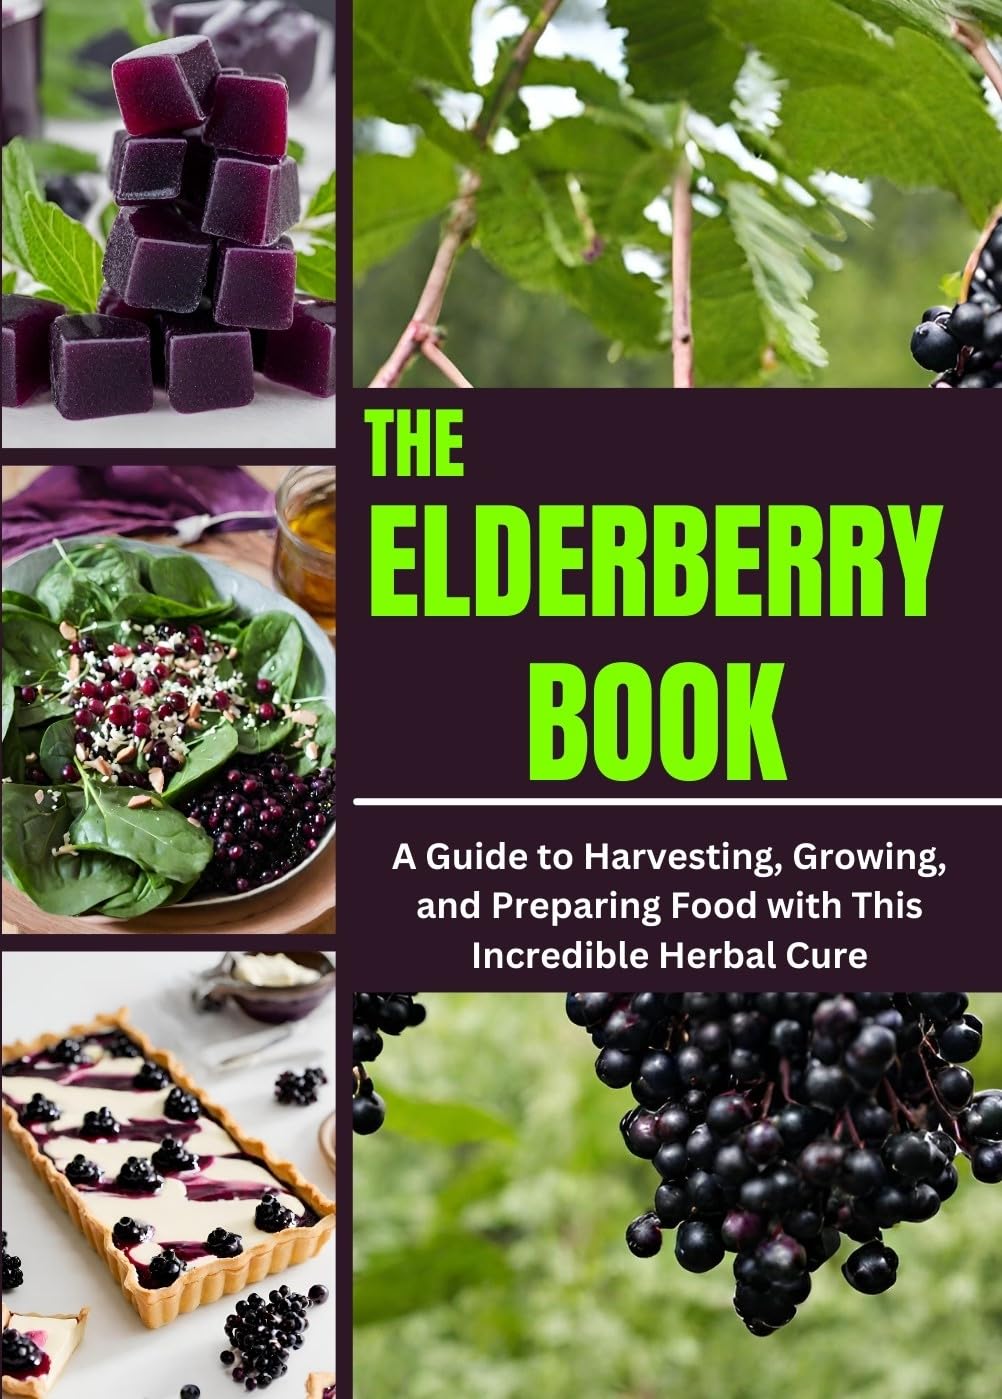 THE ELDERBERRY BOOK: A Guide to Harvesting, Growing, and Preparing Food with This Incredible Herbal Cure